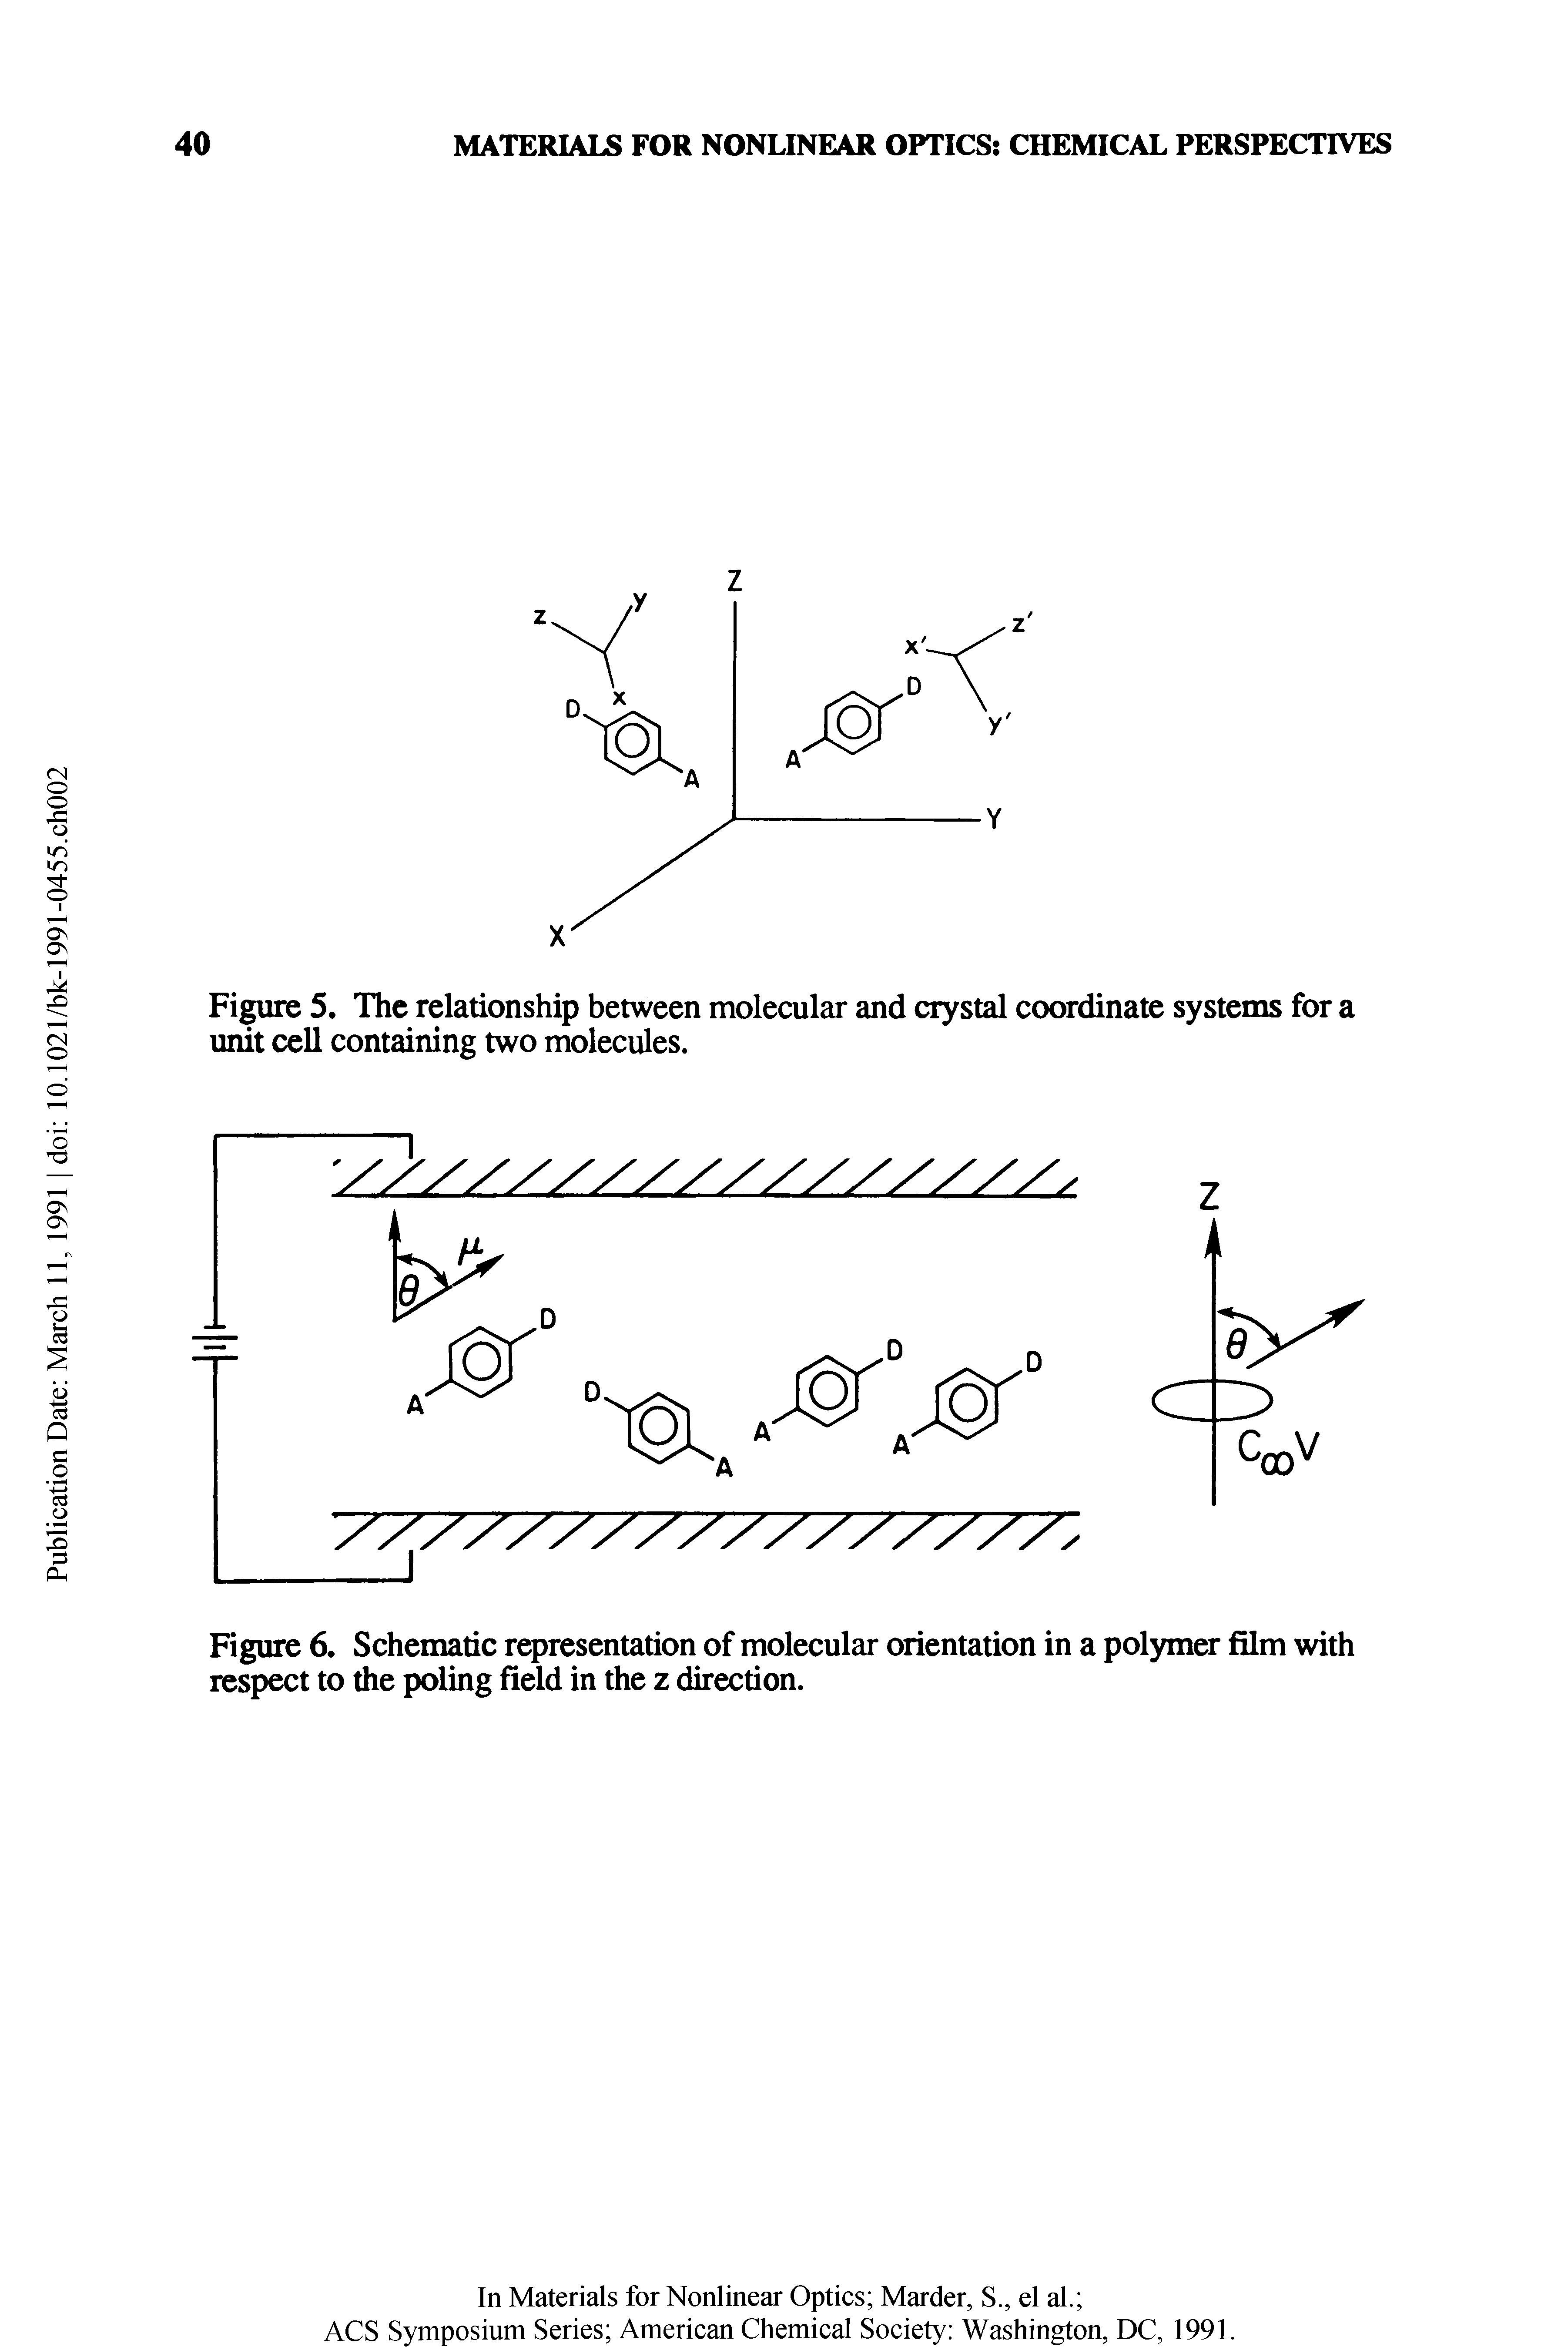 Figure 6. Schematic representation of molecular orientation in a polymer film with respect to die poling field in the z direction.